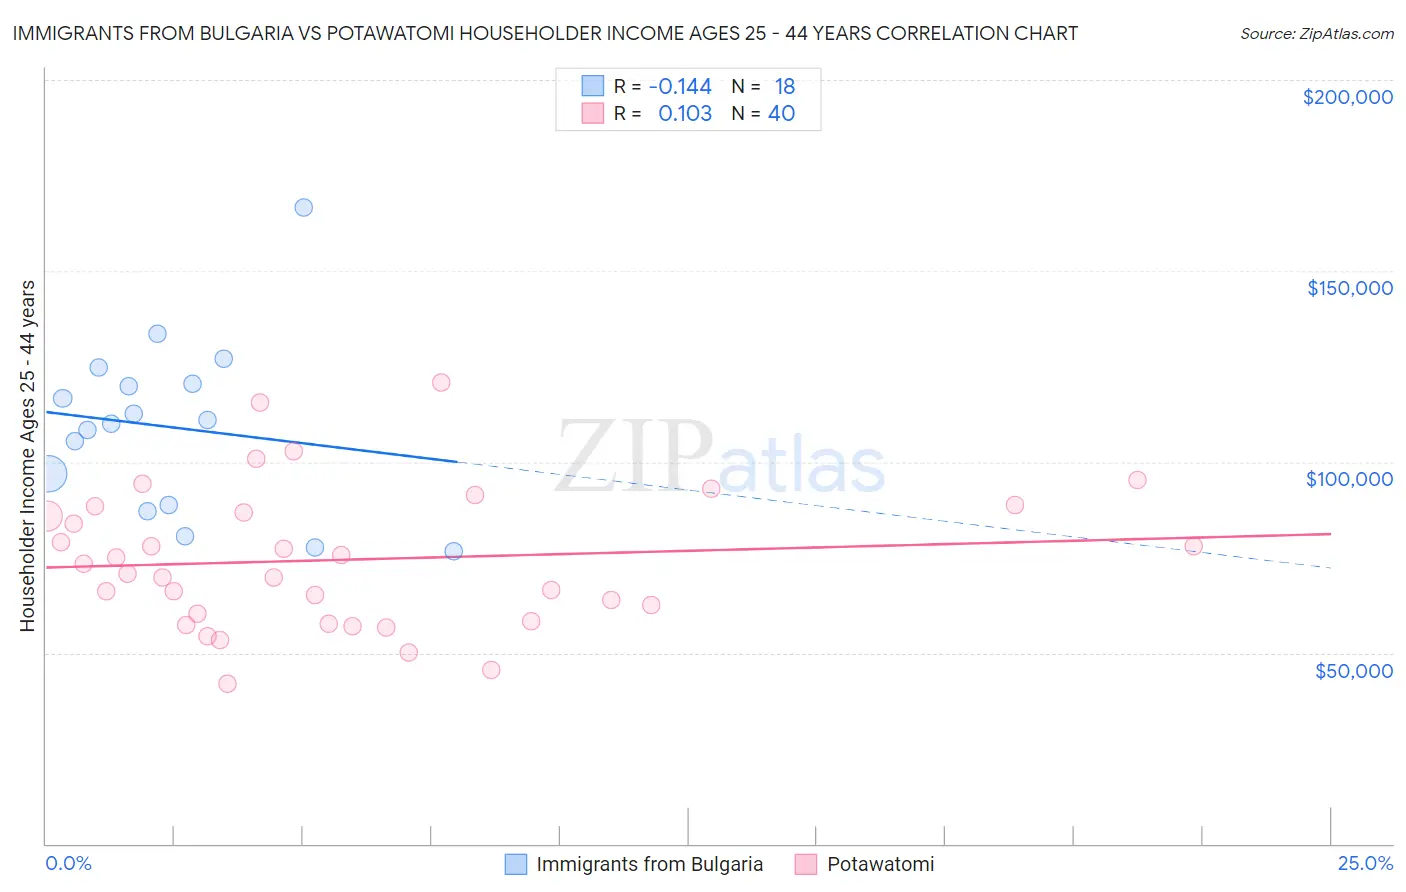 Immigrants from Bulgaria vs Potawatomi Householder Income Ages 25 - 44 years